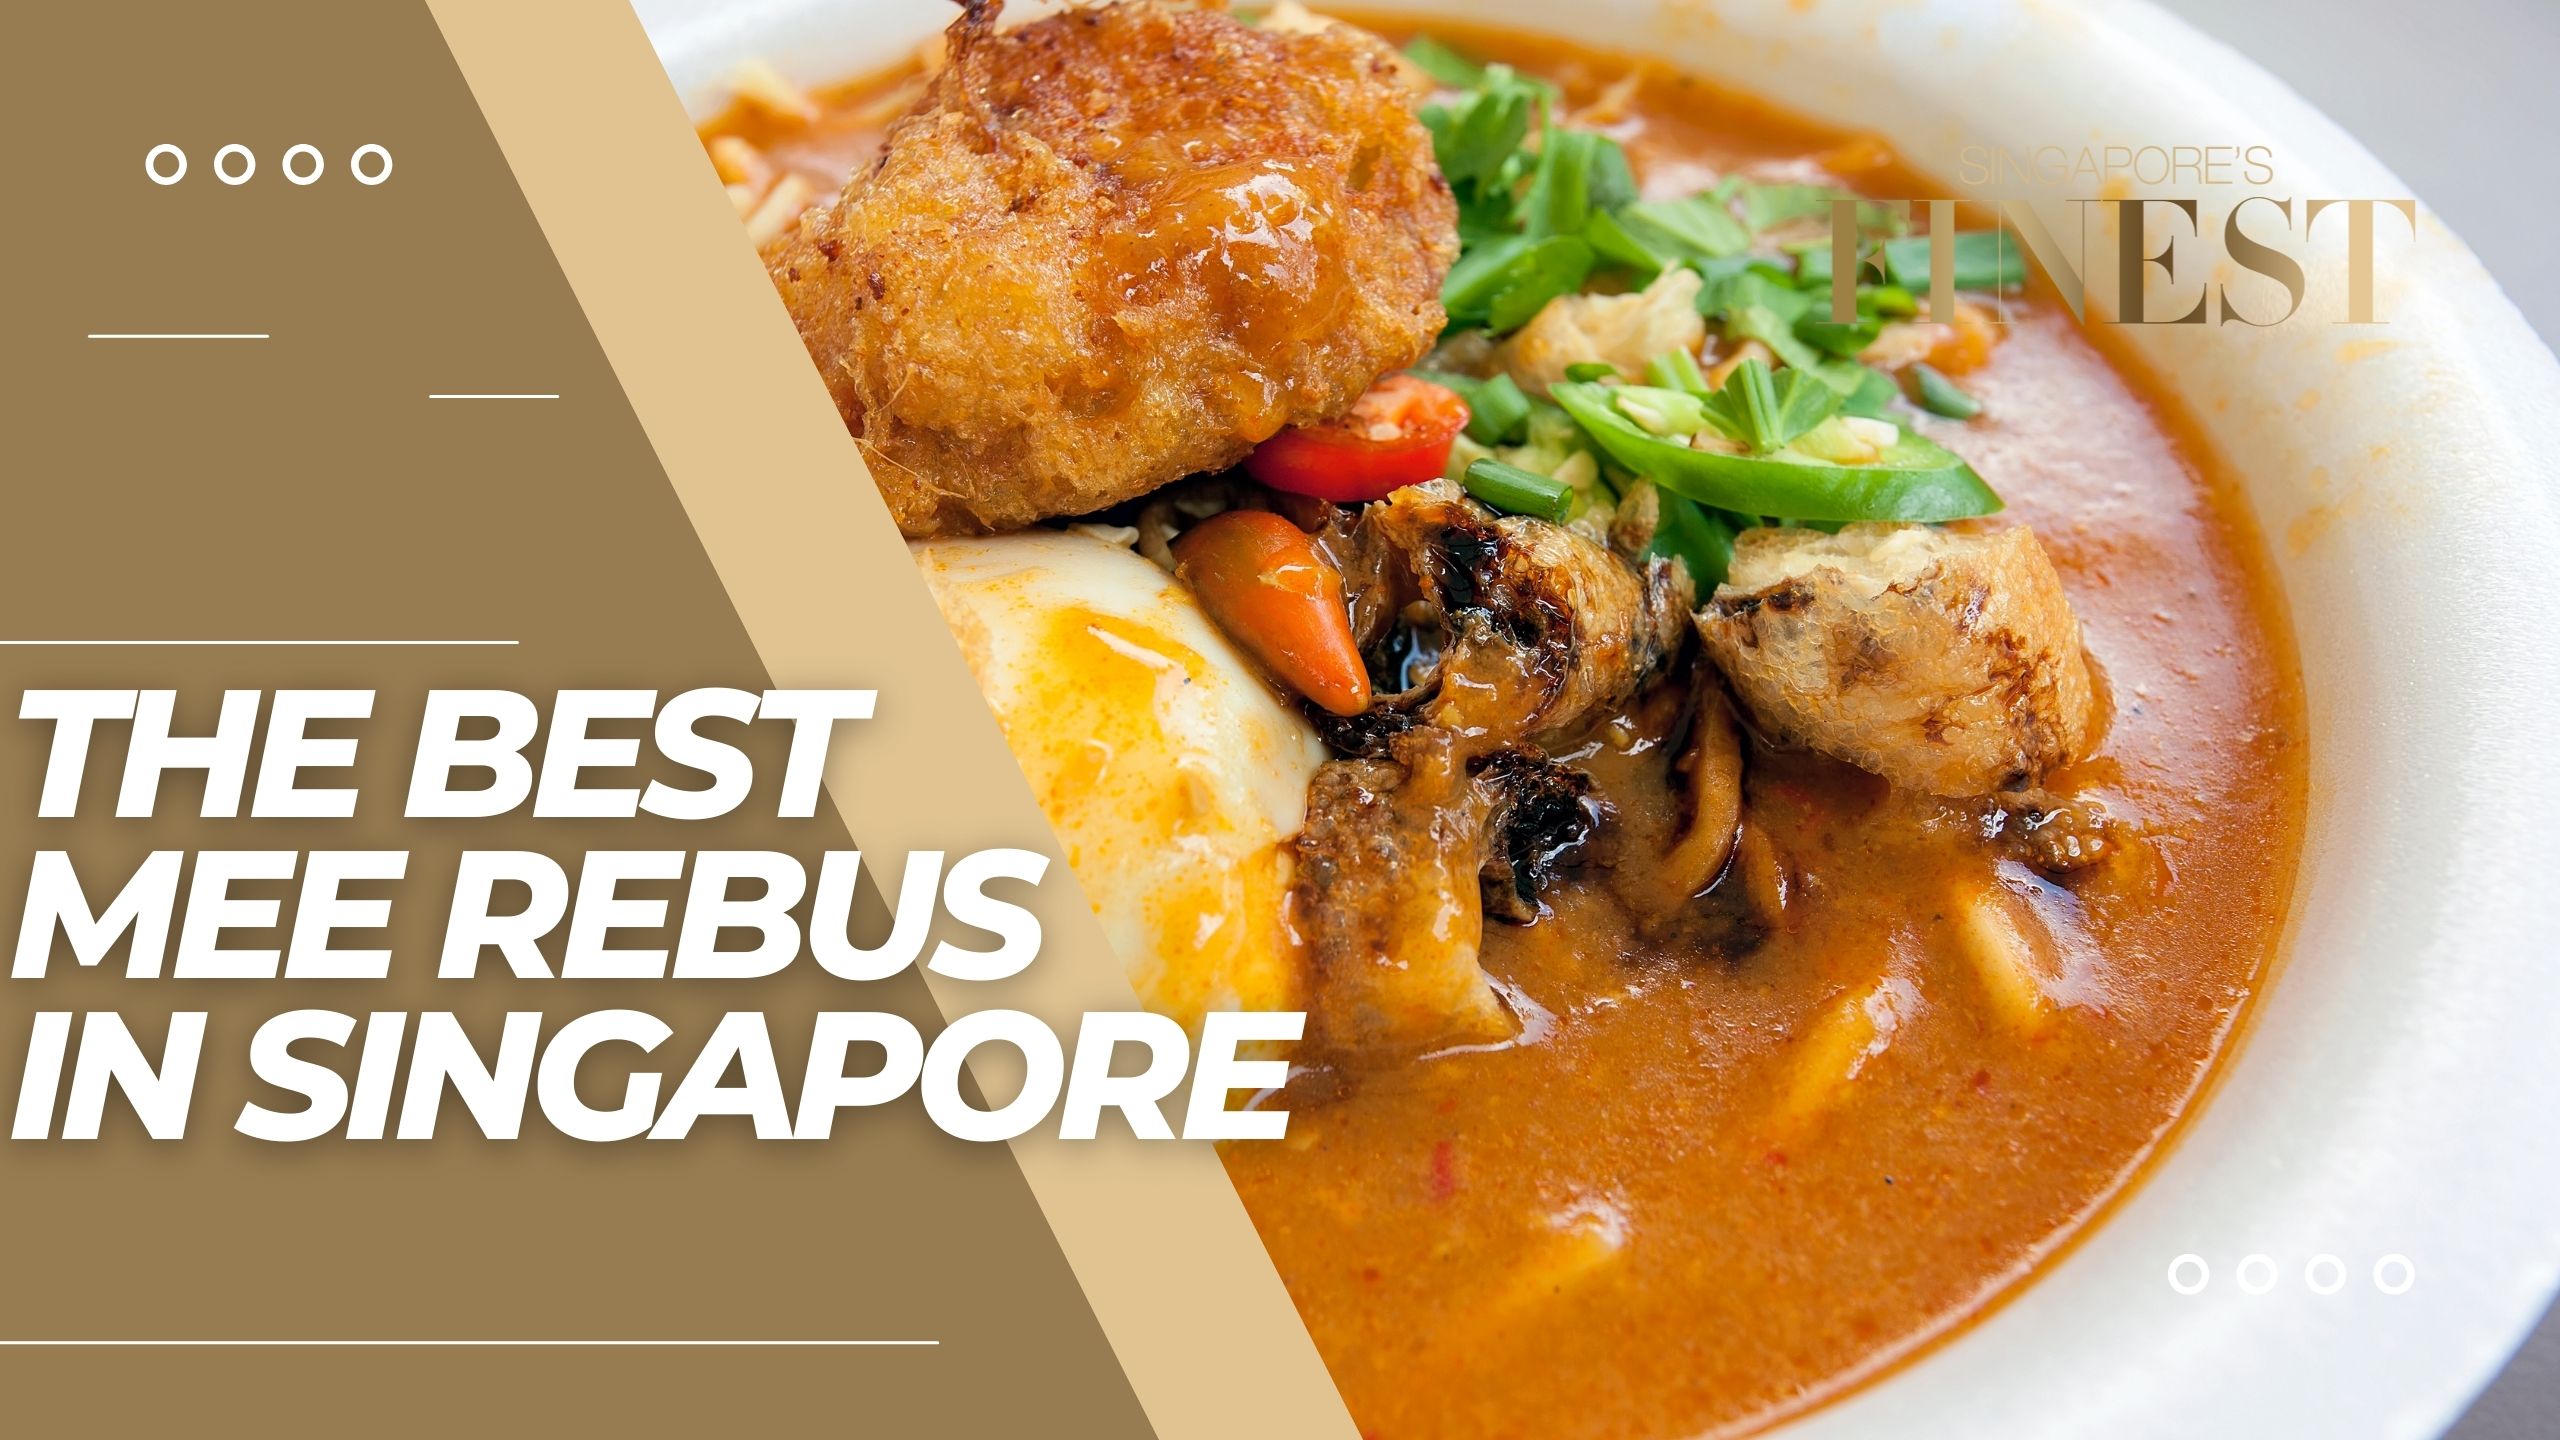 The Finest Mee Rebus in Singapore